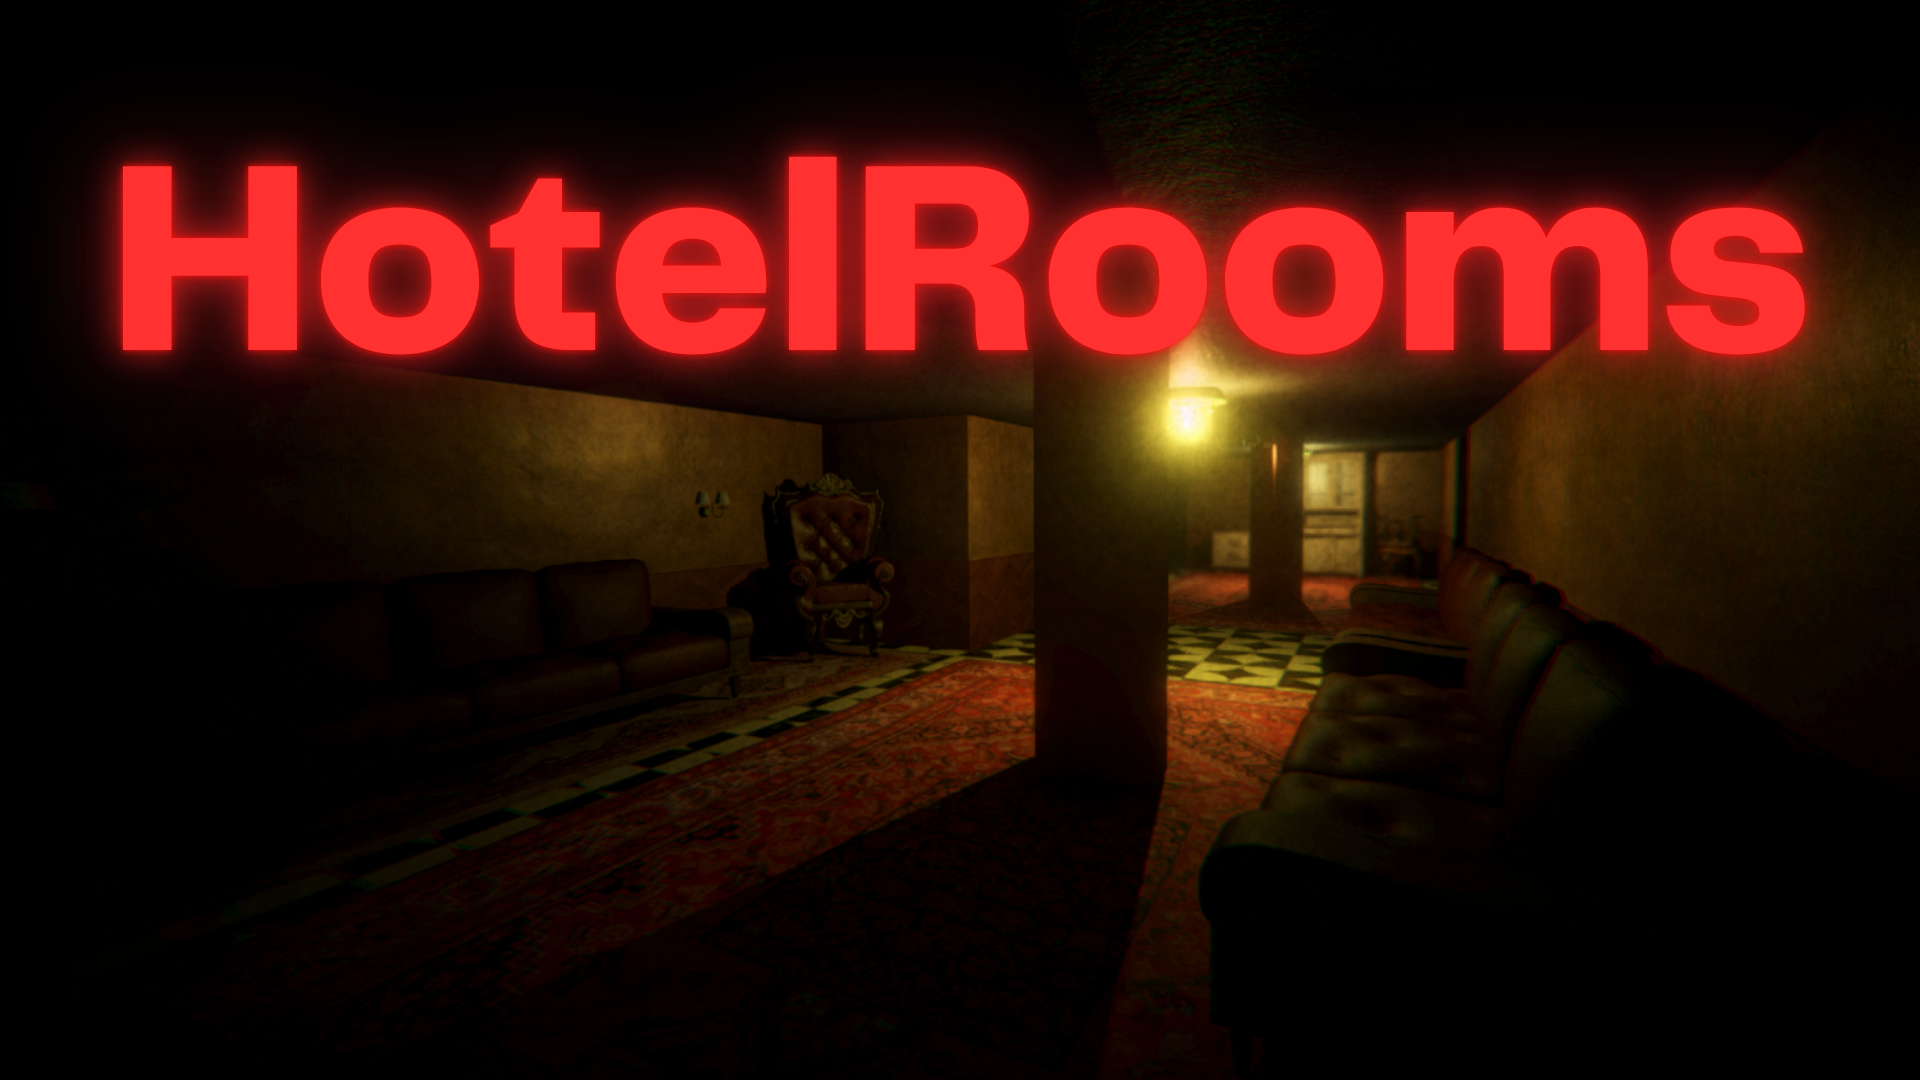 The HotelRooms